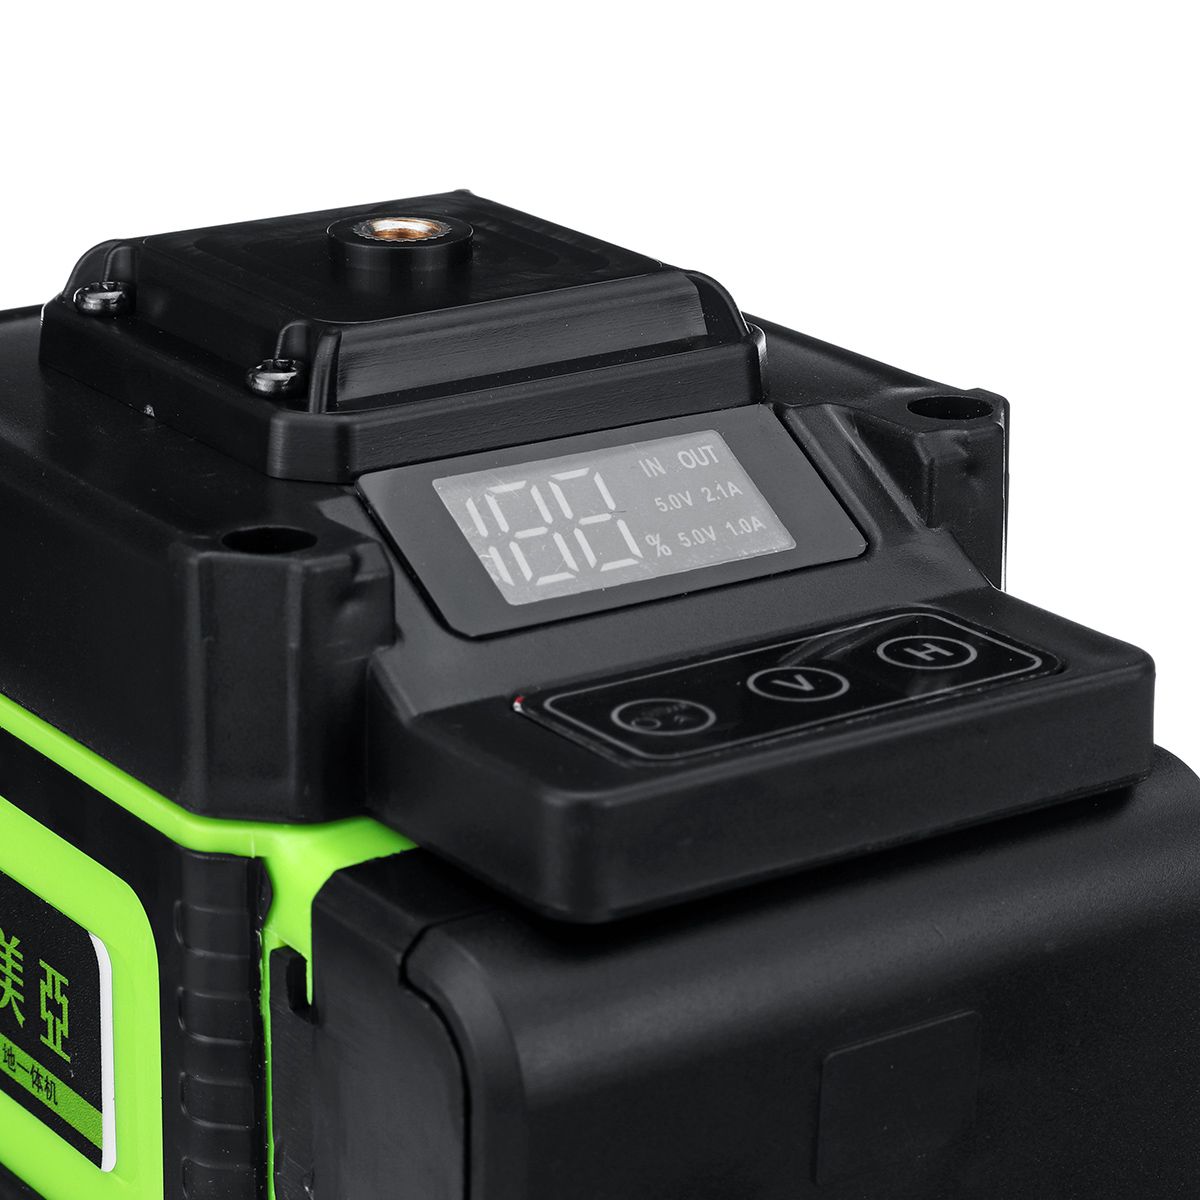 12-Greeen-Lines-Laser-Level-Measuring-DevicesLine-360-Degree-Rotary-Horizontal-And-Vertical-Cross-La-1545474